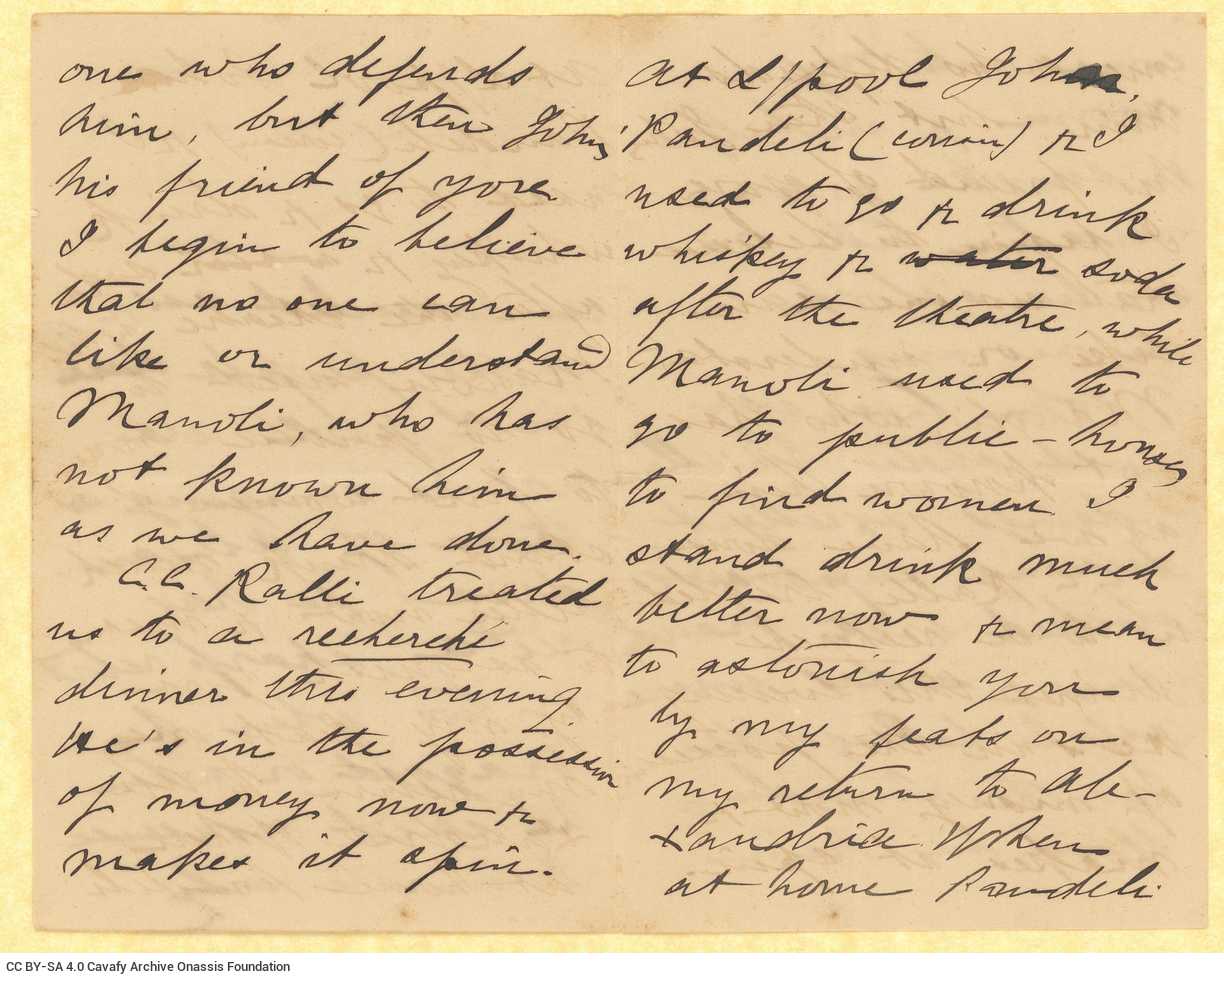 Handwritten letter by Mike Ralli to Cavafy on three bifolios, with notes on all sides. The author describes his stay in Londo